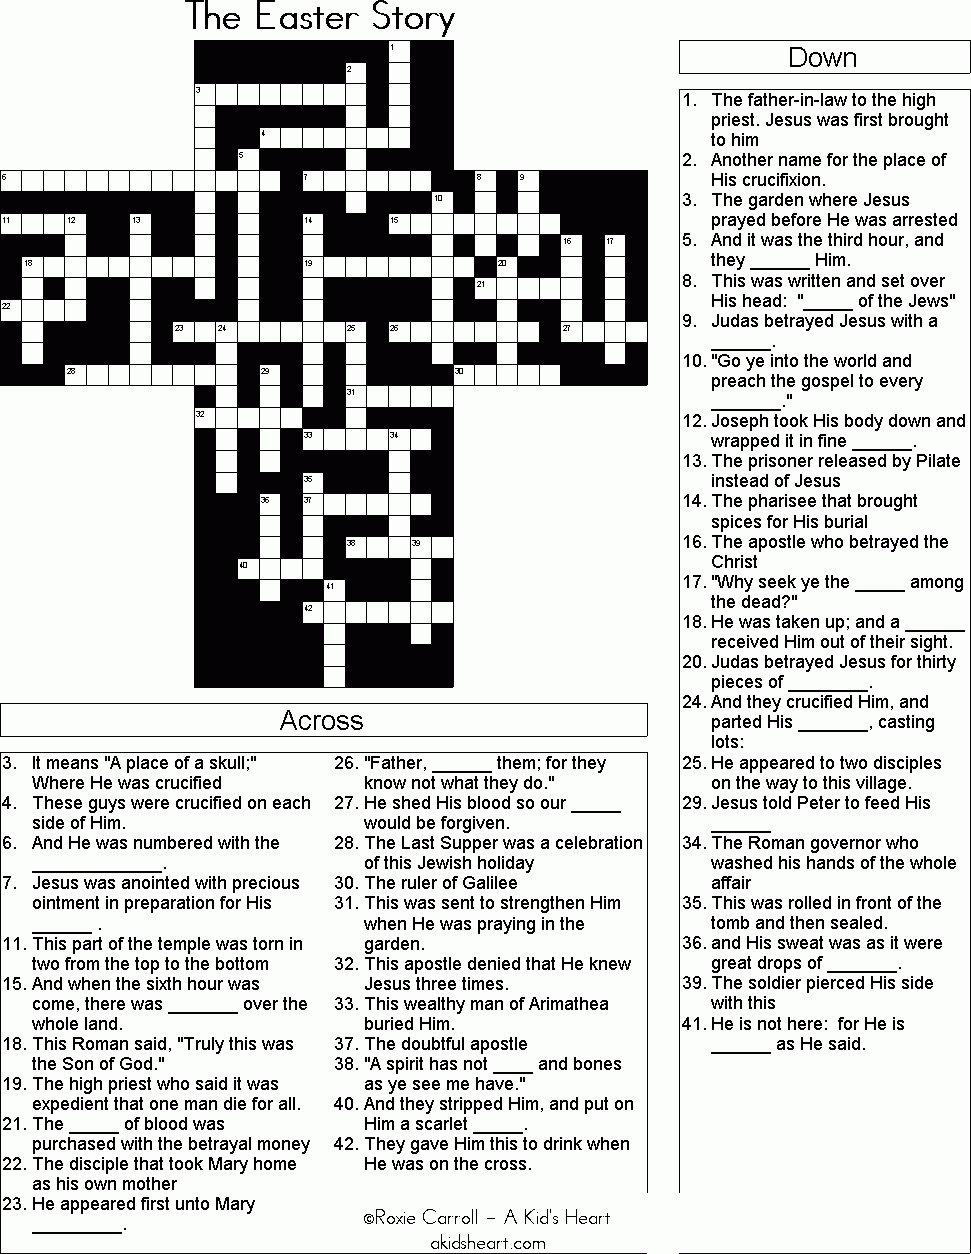 The Easter Story Crossword Puzzle | Bible Crosswords/word Search - Printable Bible Crossword Puzzles With Scripture References